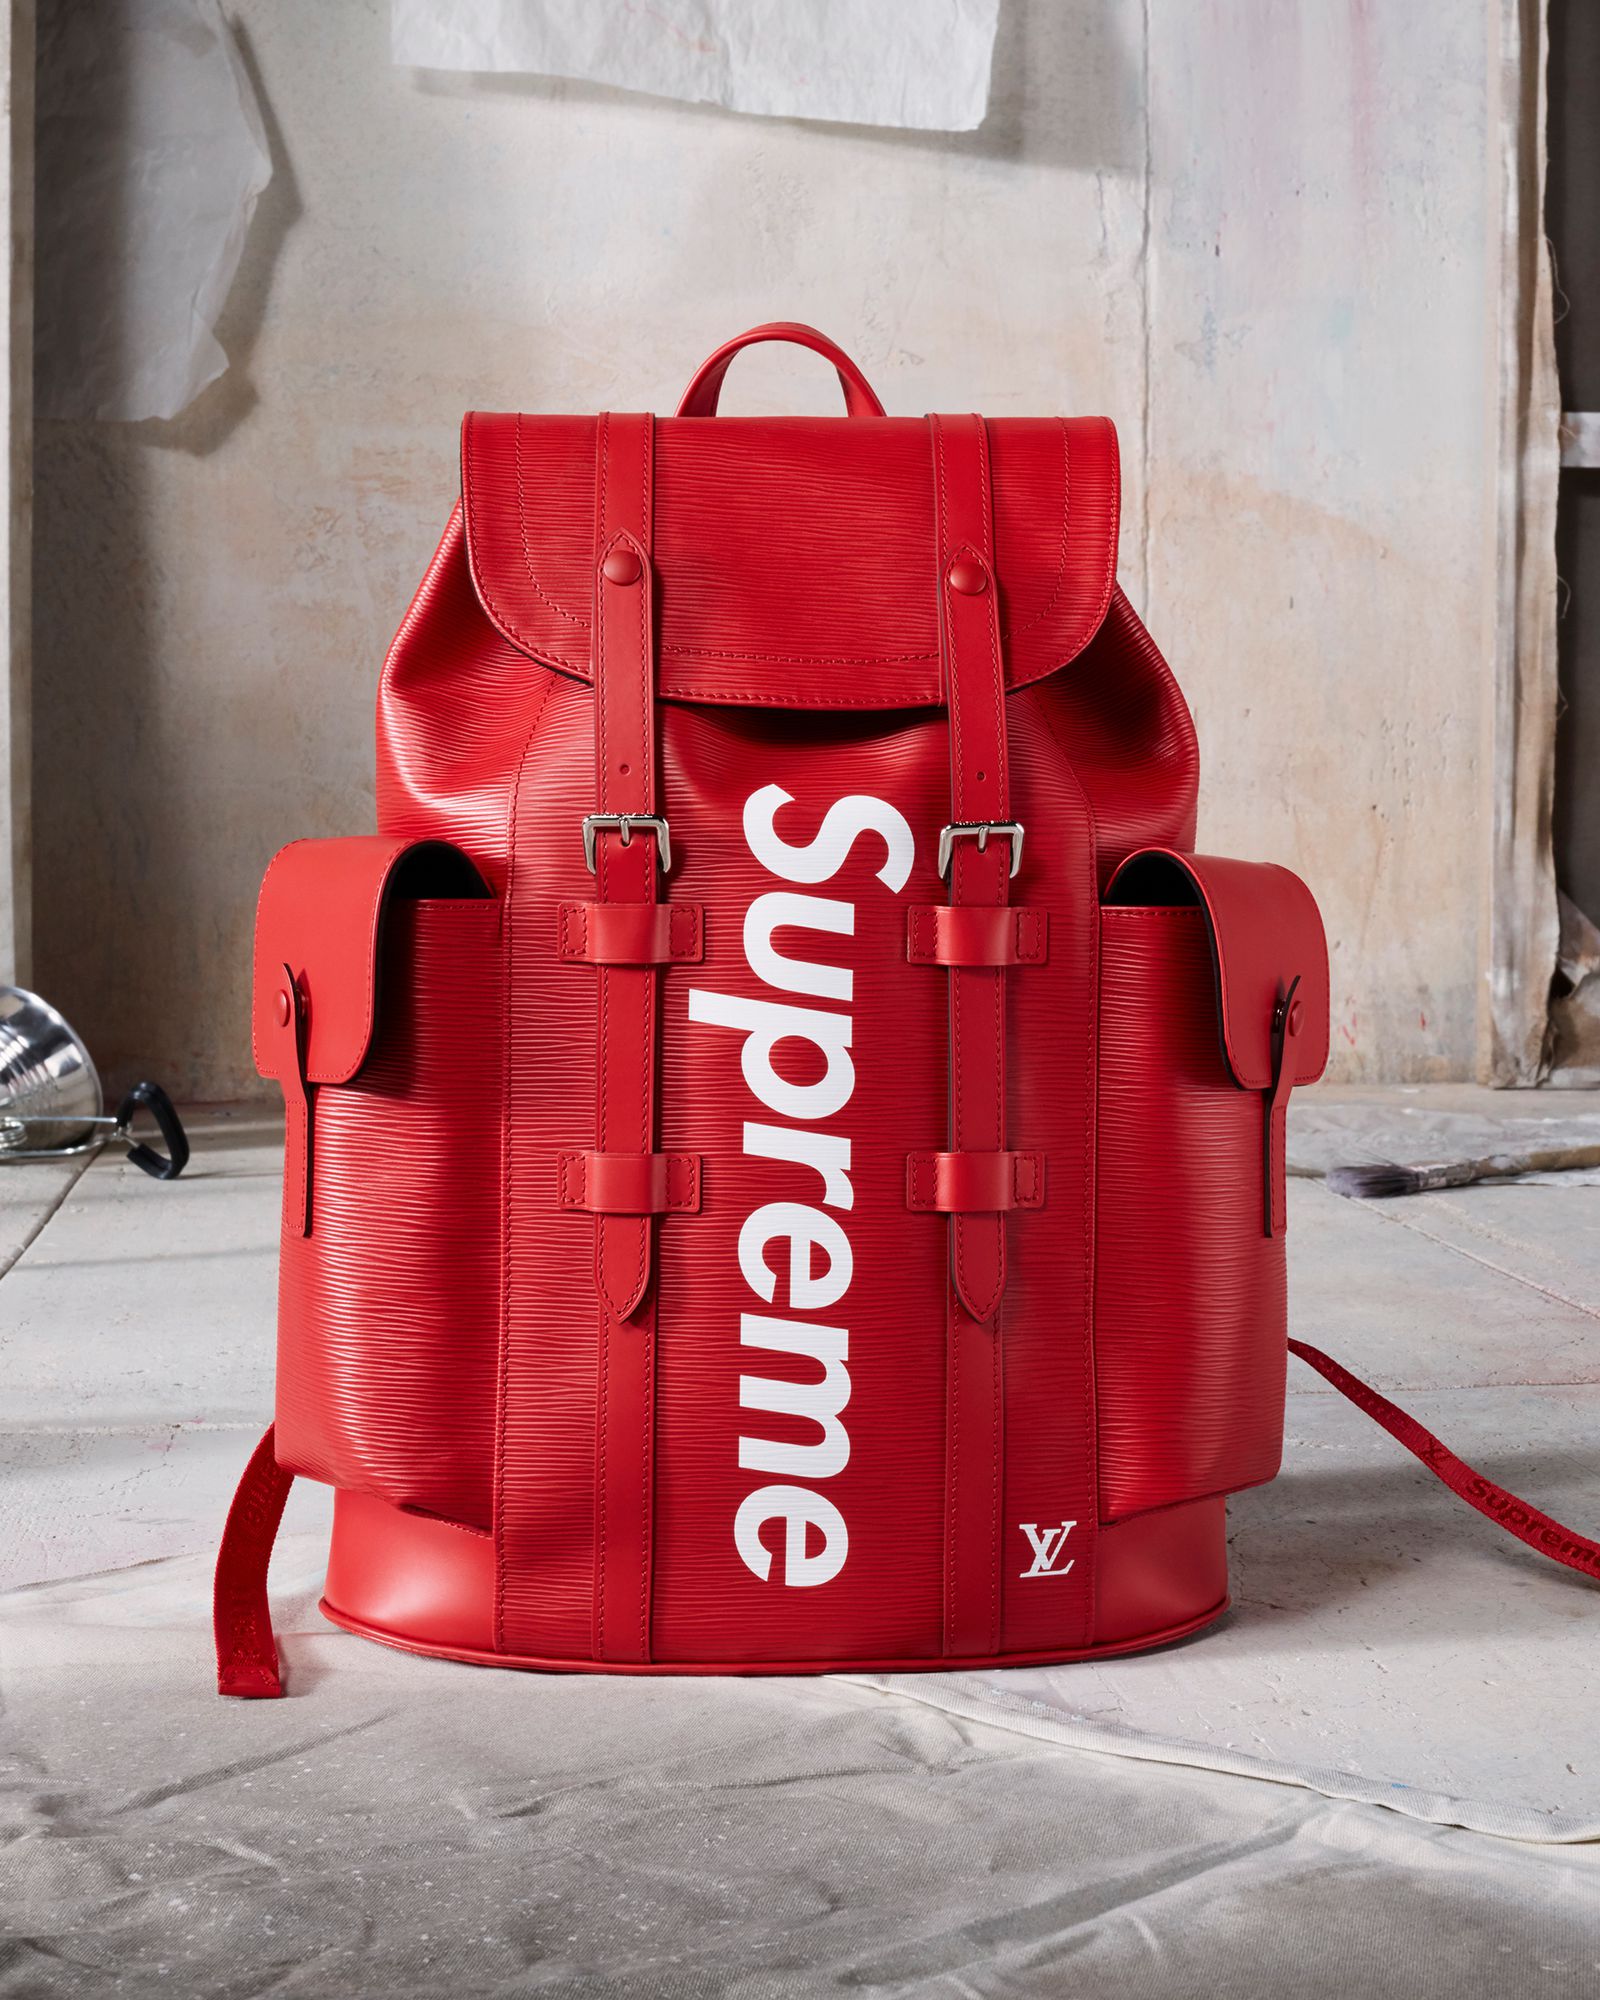 Louis Vuitton x Supreme Christopher Backpack Epi PM Red - US